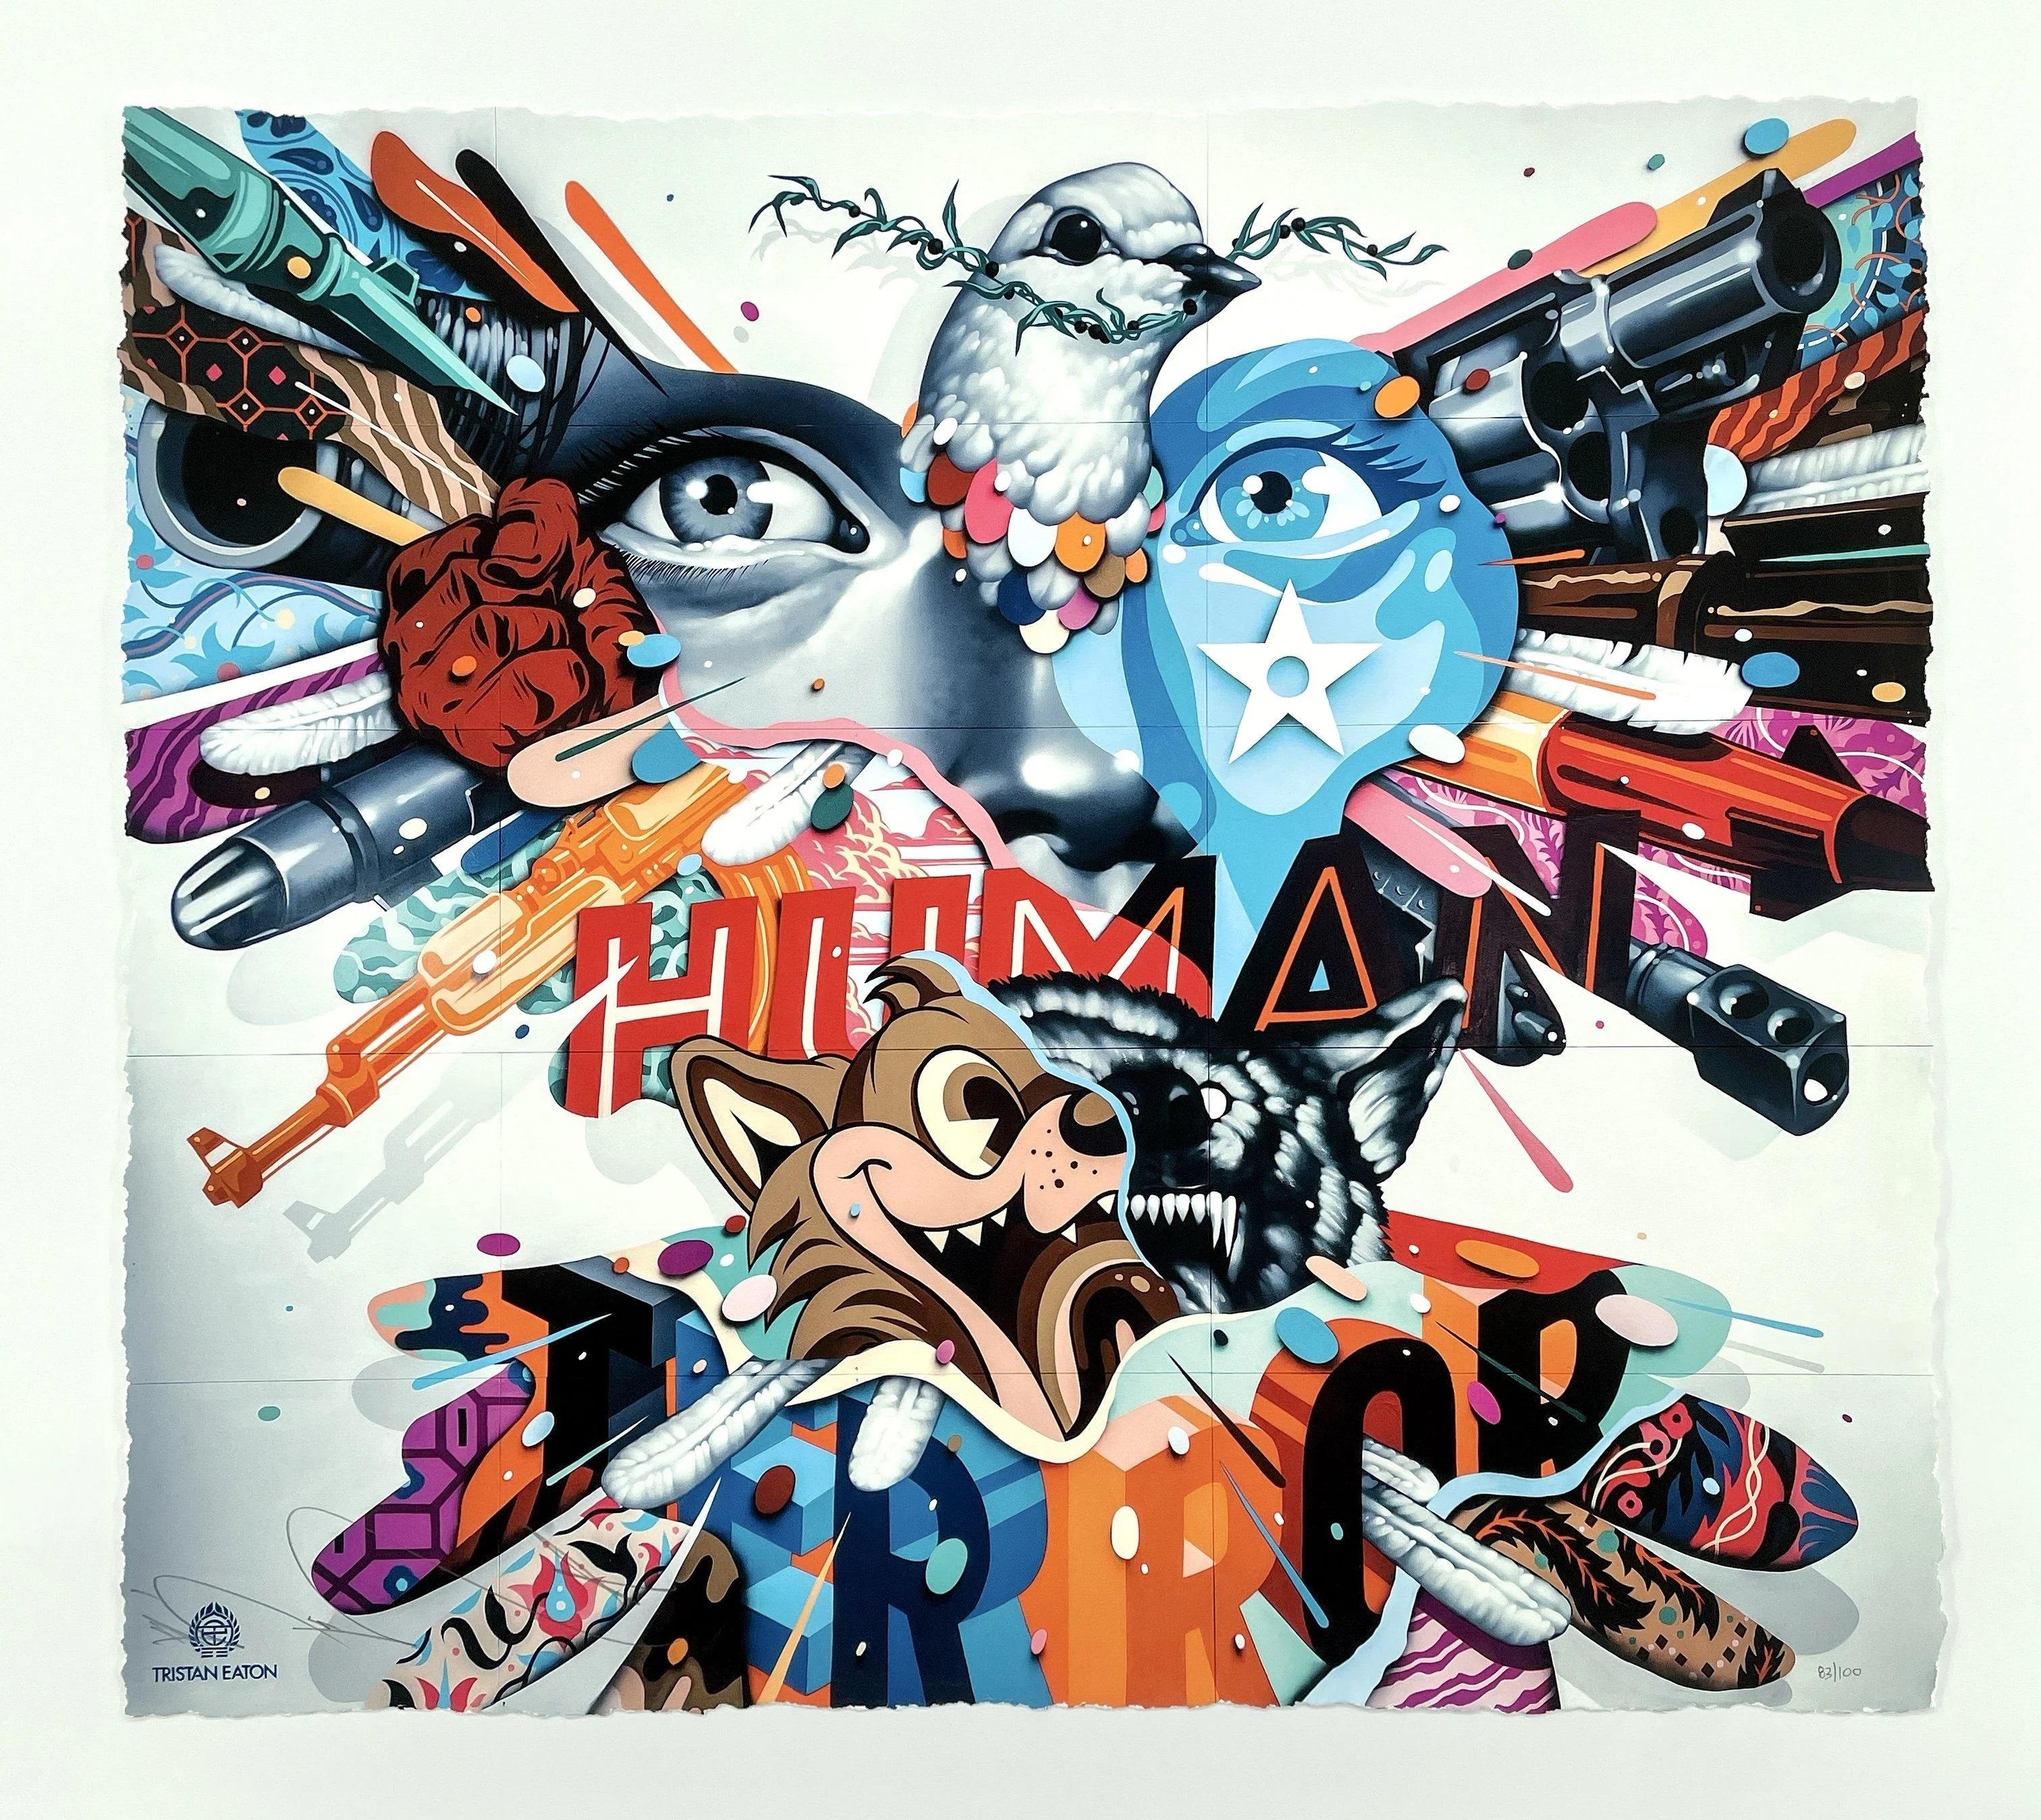 Tristan Eaton Abstract Print - Human Terror Signed and Numbered Giclee Print War and Peace Street Art Graffiti